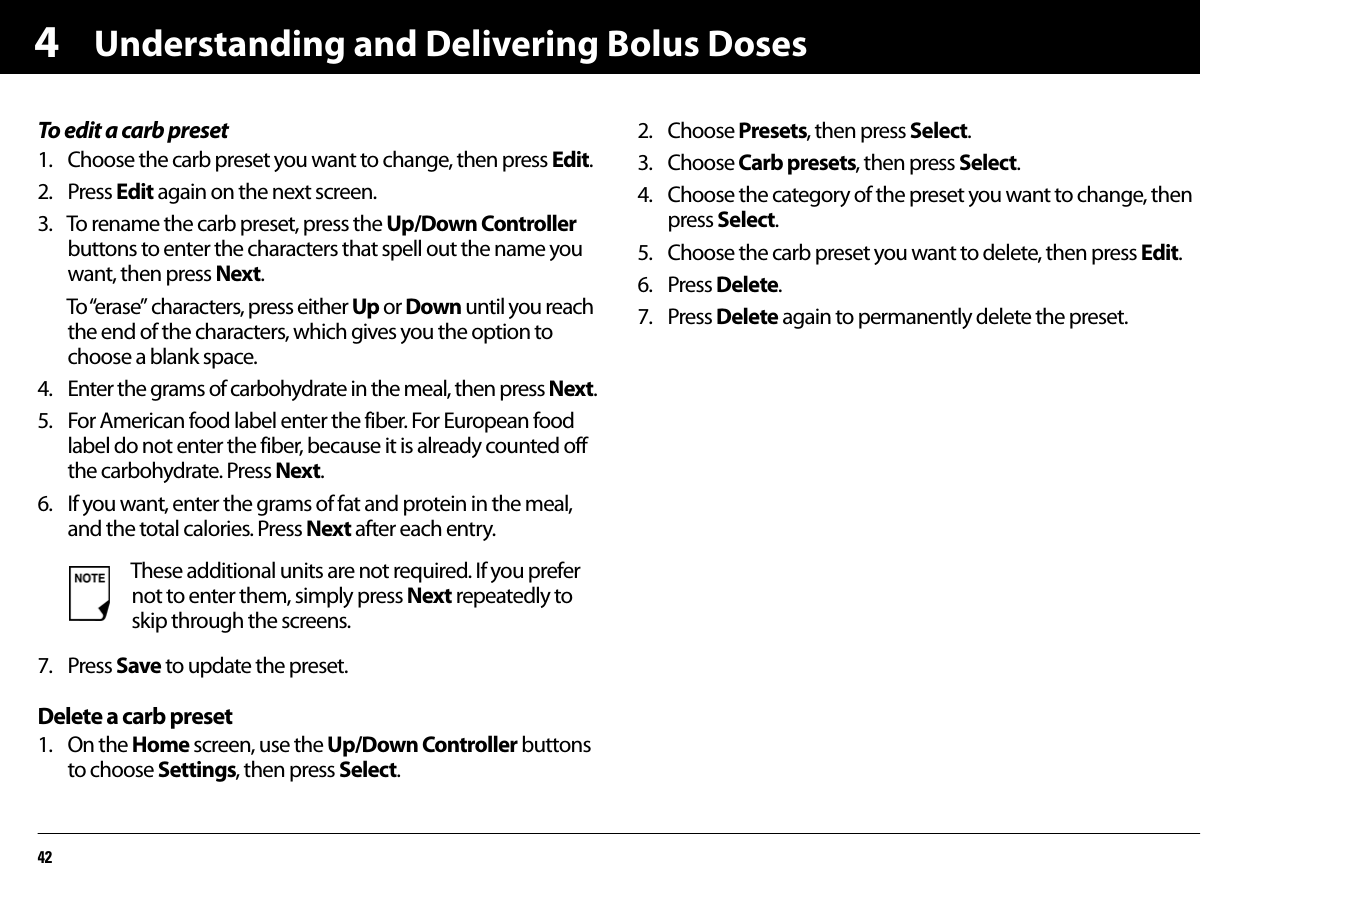 Understanding and Delivering Bolus Doses424To edit a carb preset1. Choose the carb preset you want to change, then press Edit.2. Press Edit again on the next screen.3. To rename the carb preset, press the Up/Down Controller buttons to enter the characters that spell out the name you want, then press Next.To “erase” characters, press either Up or Down until you reach the end of the characters, which gives you the option to choose a blank space.4. Enter the grams of carbohydrate in the meal, then press Next.5. For American food label enter the fiber. For European food label do not enter the fiber, because it is already counted off the carbohydrate. Press Next.6. If you want, enter the grams of fat and protein in the meal, and the total calories. Press Next after each entry.7. Press Save to update the preset.Delete a carb preset1. On the Home screen, use the Up/Down Controller buttons to choose Settings, then press Select.2. Choose Presets, then press Select.3. Choose Carb presets, then press Select.4. Choose the category of the preset you want to change, then press Select.5. Choose the carb preset you want to delete, then press Edit.6. Press Delete.7. Press Delete again to permanently delete the preset.These additional units are not required. If you prefer not to enter them, simply press Next repeatedly to skip through the screens.